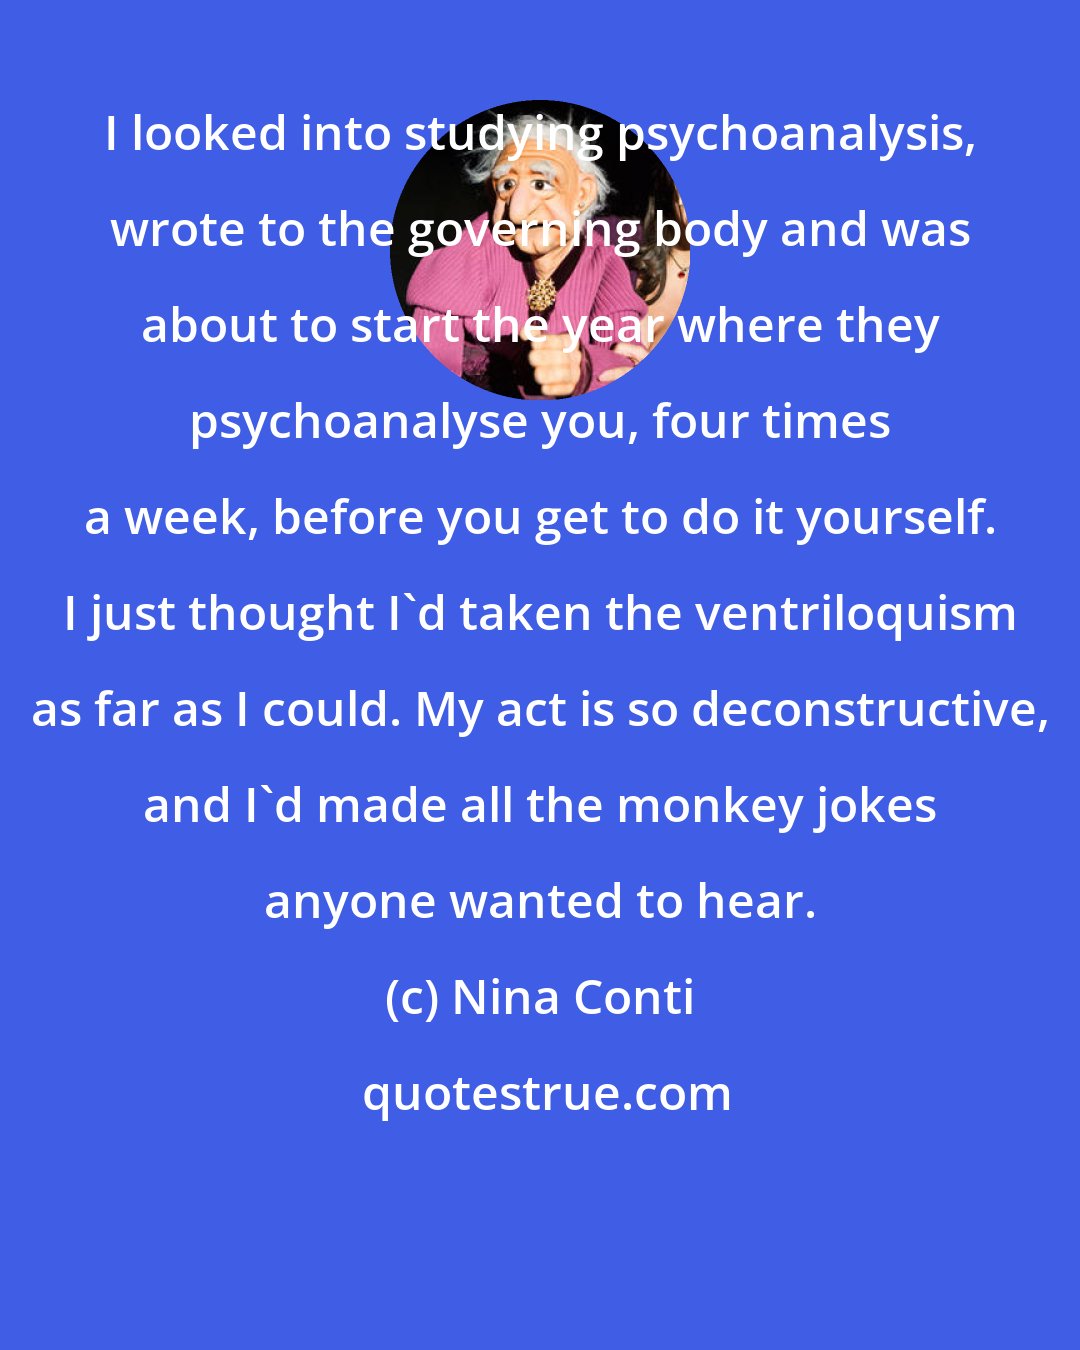 Nina Conti: I looked into studying psychoanalysis, wrote to the governing body and was about to start the year where they psychoanalyse you, four times a week, before you get to do it yourself. I just thought I'd taken the ventriloquism as far as I could. My act is so deconstructive, and I'd made all the monkey jokes anyone wanted to hear.